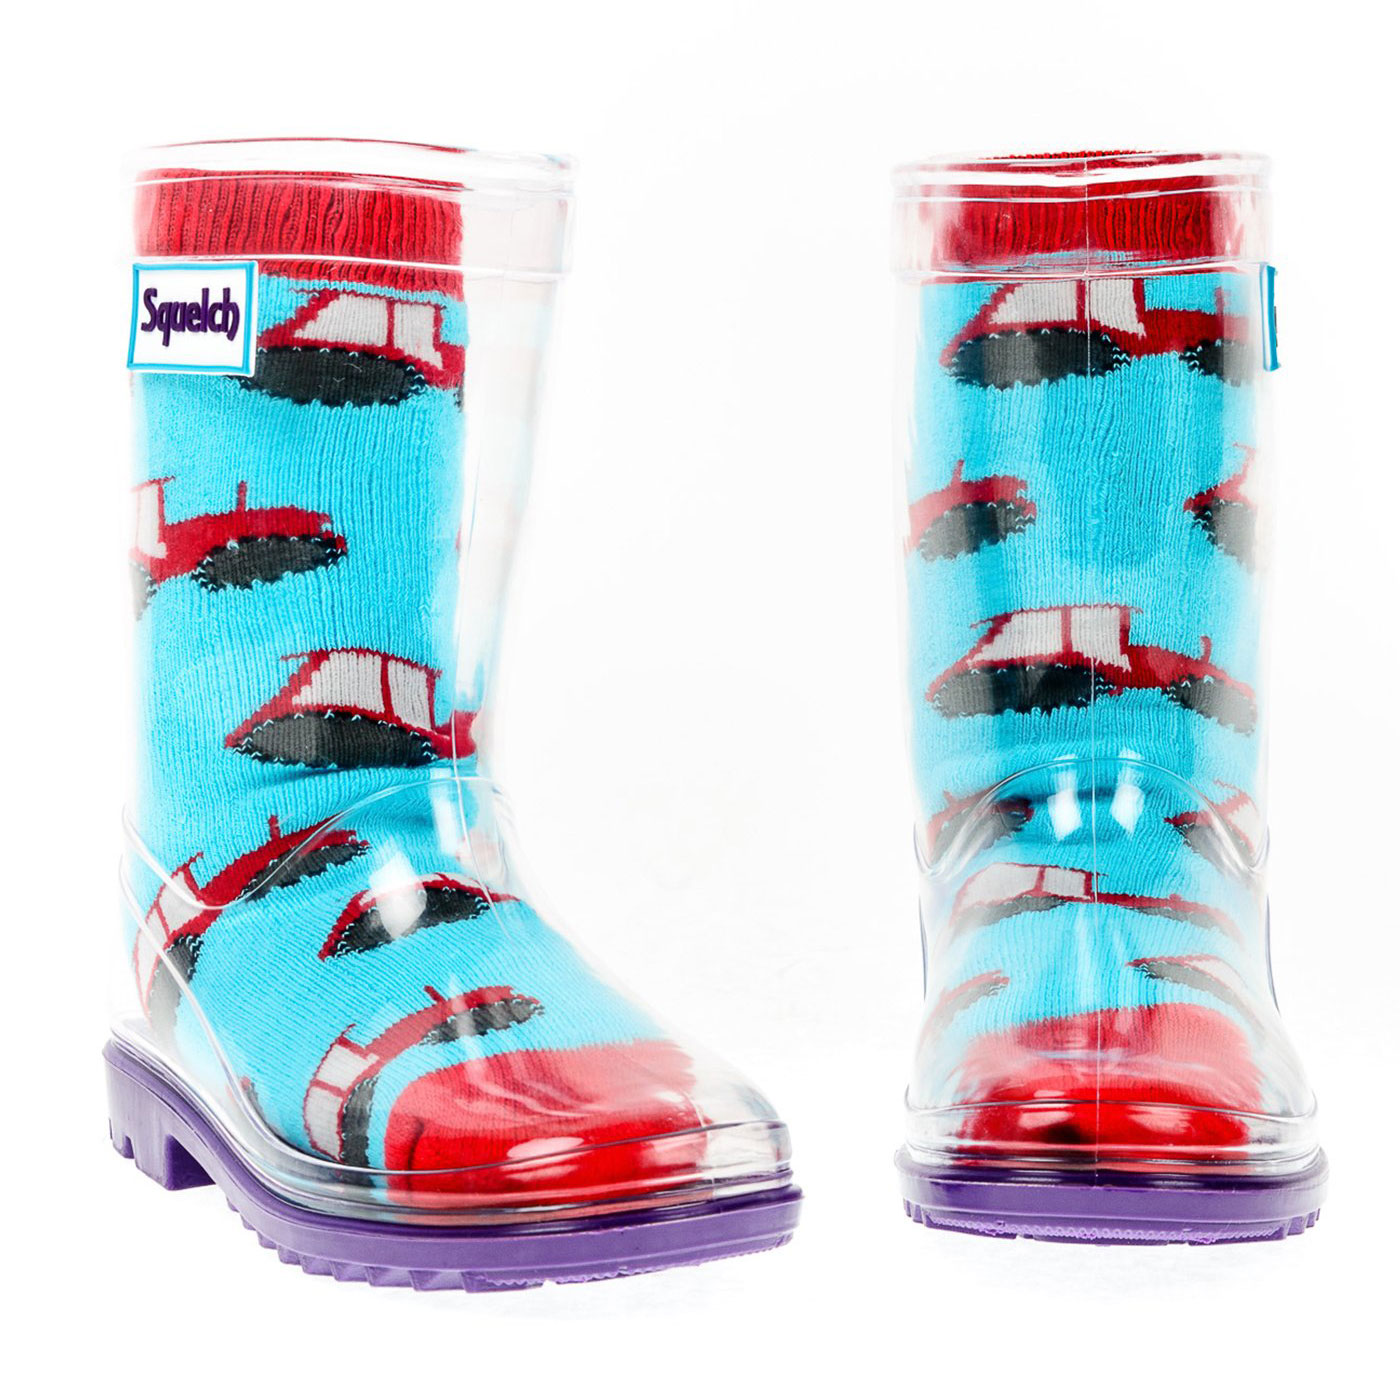 Tractor Mini Welly Sock - Squelch Wellies